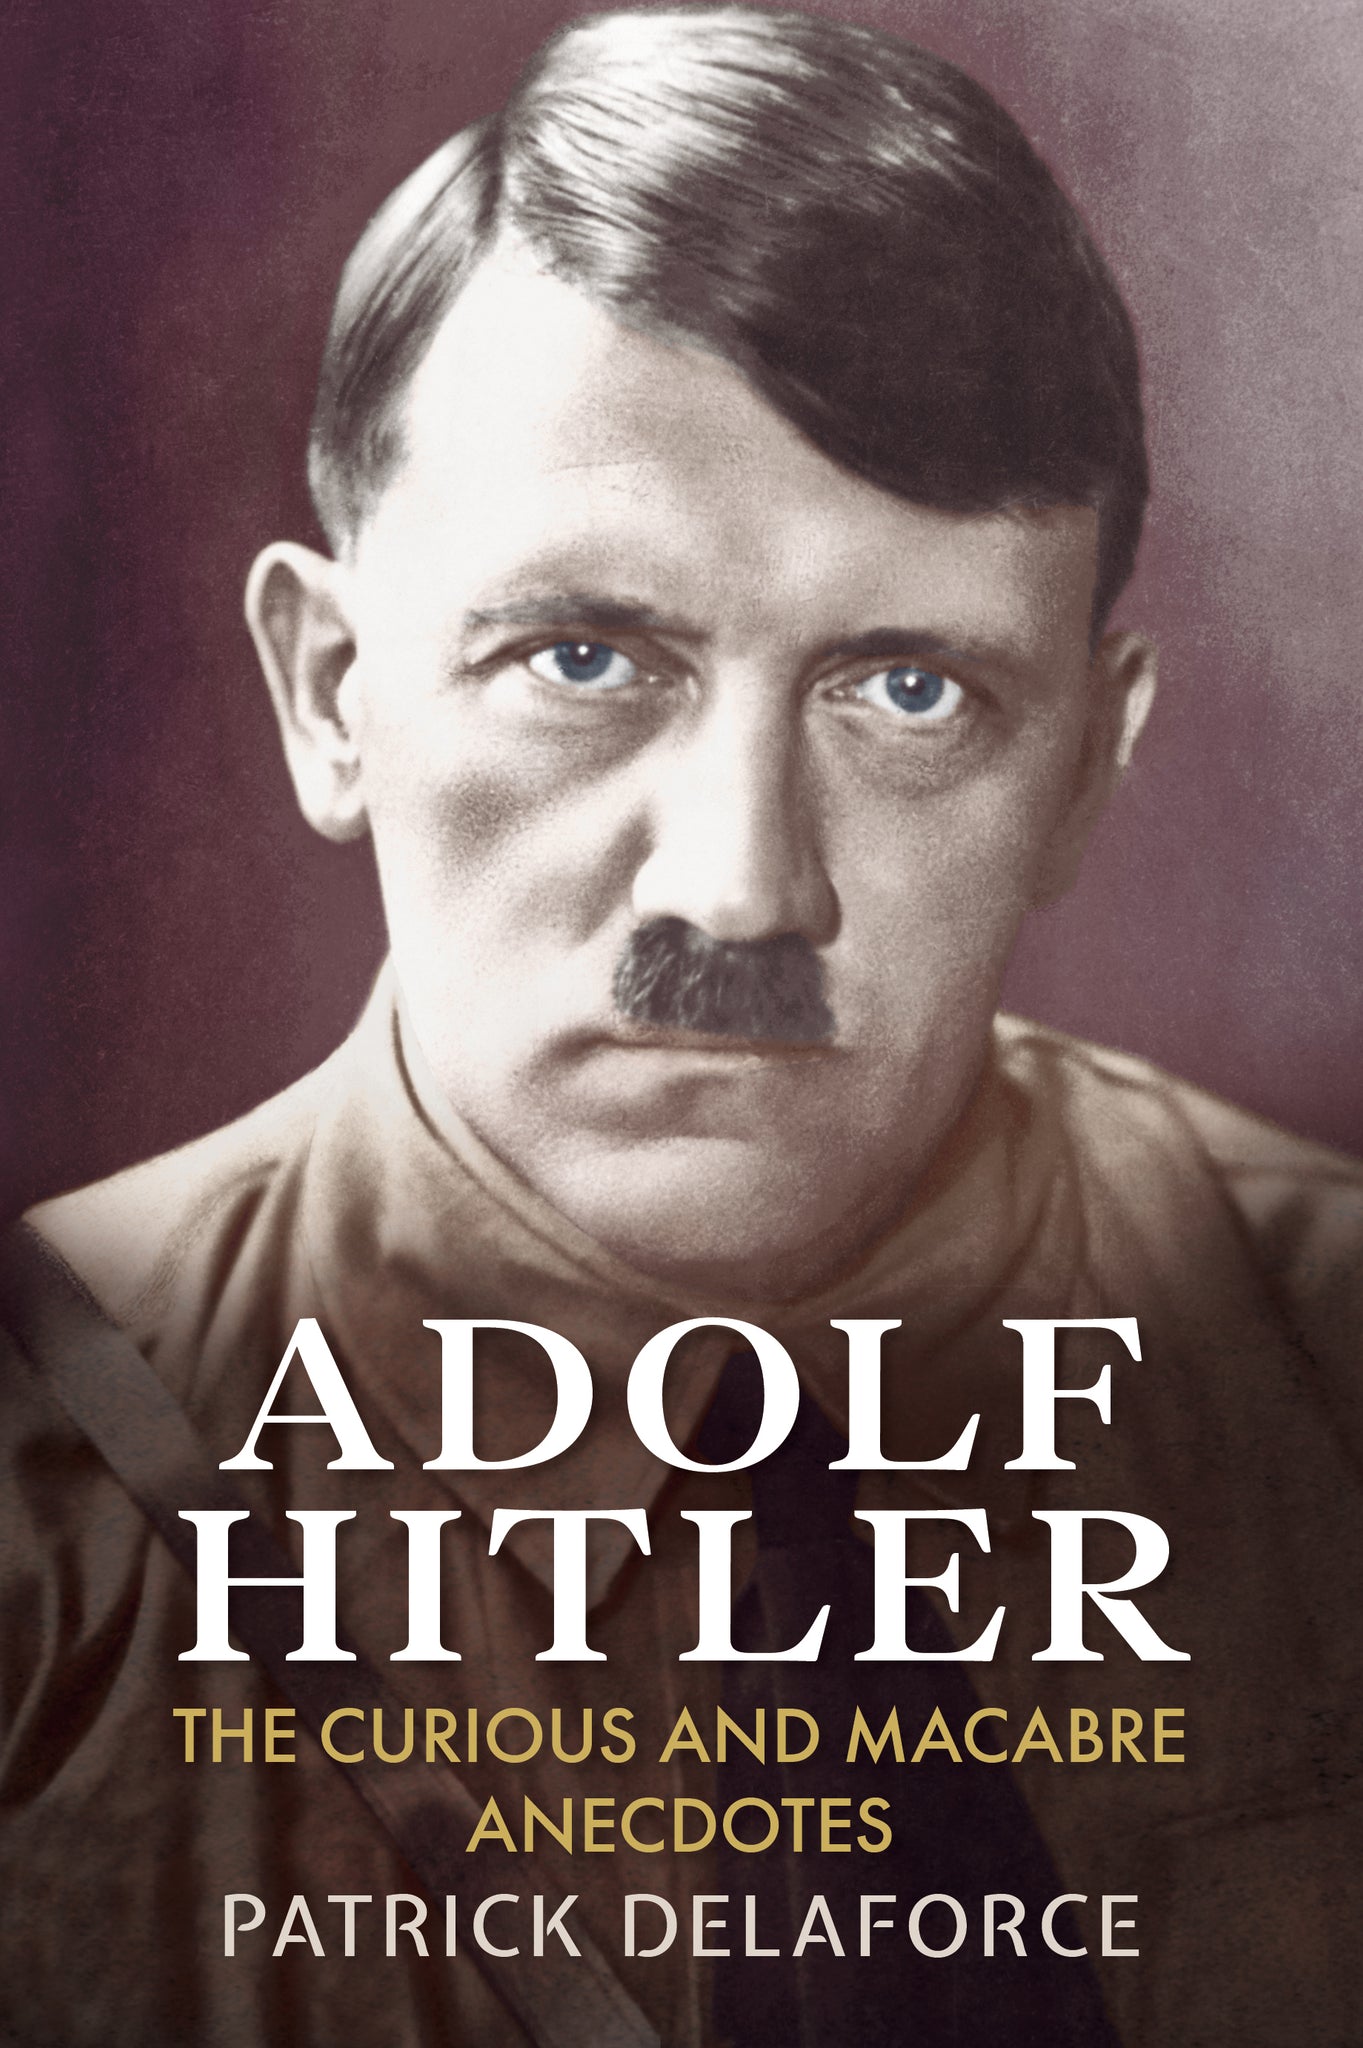 Adolf Hitler: The Curious and Macabre Anecdotes - available now from Fonthill Media